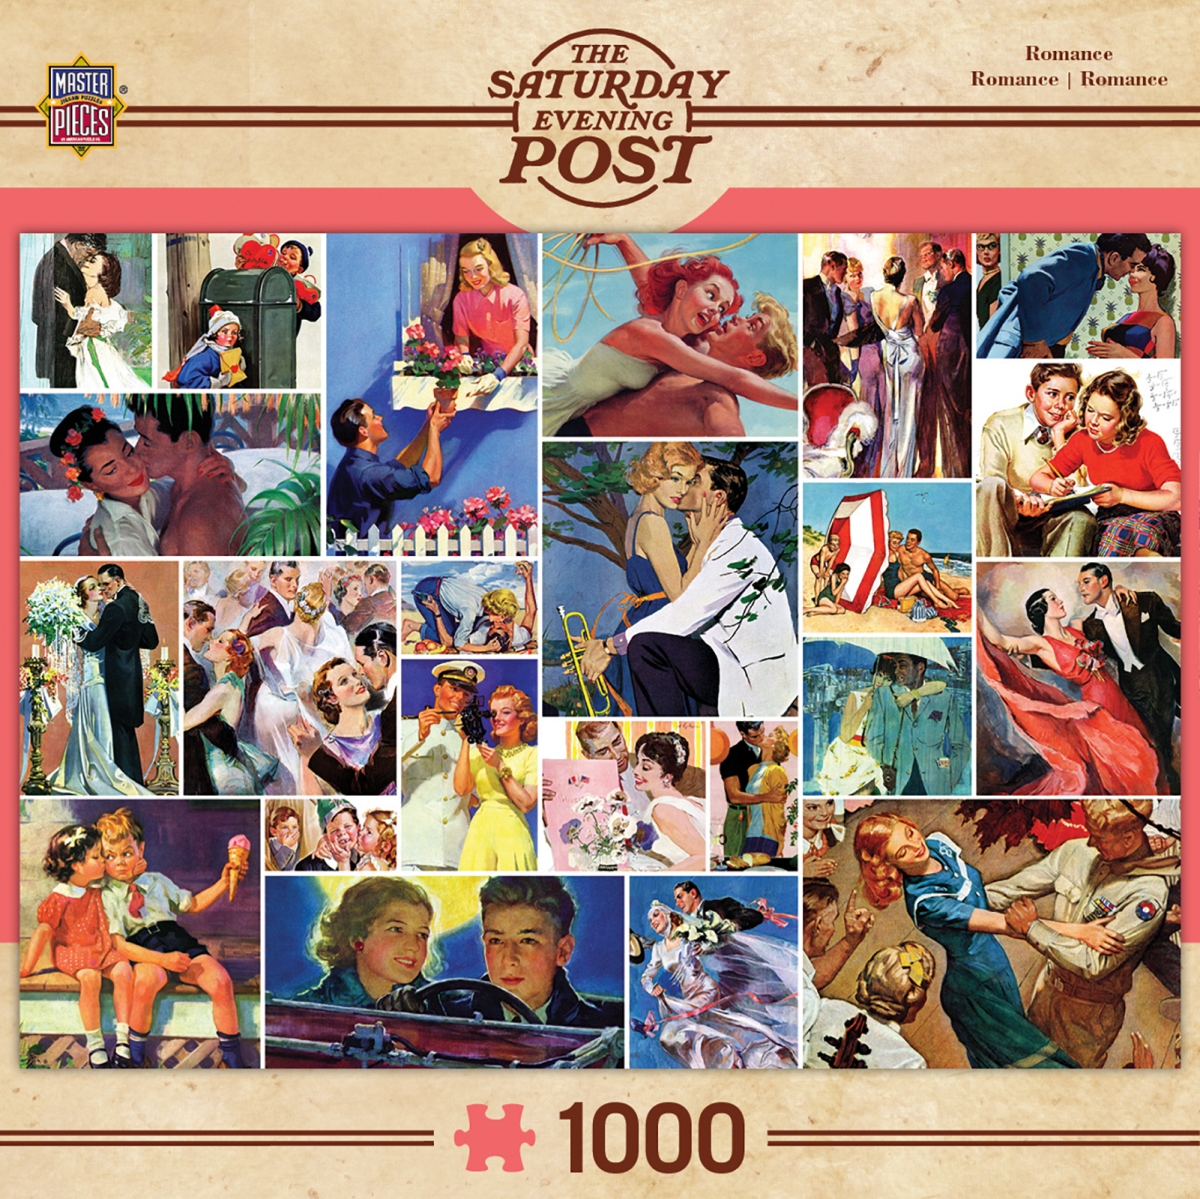 71622 19.25 X 26.75 In. Saturday Evening Post Romance Collage Jigsaw Puzzle - 1000 Piece